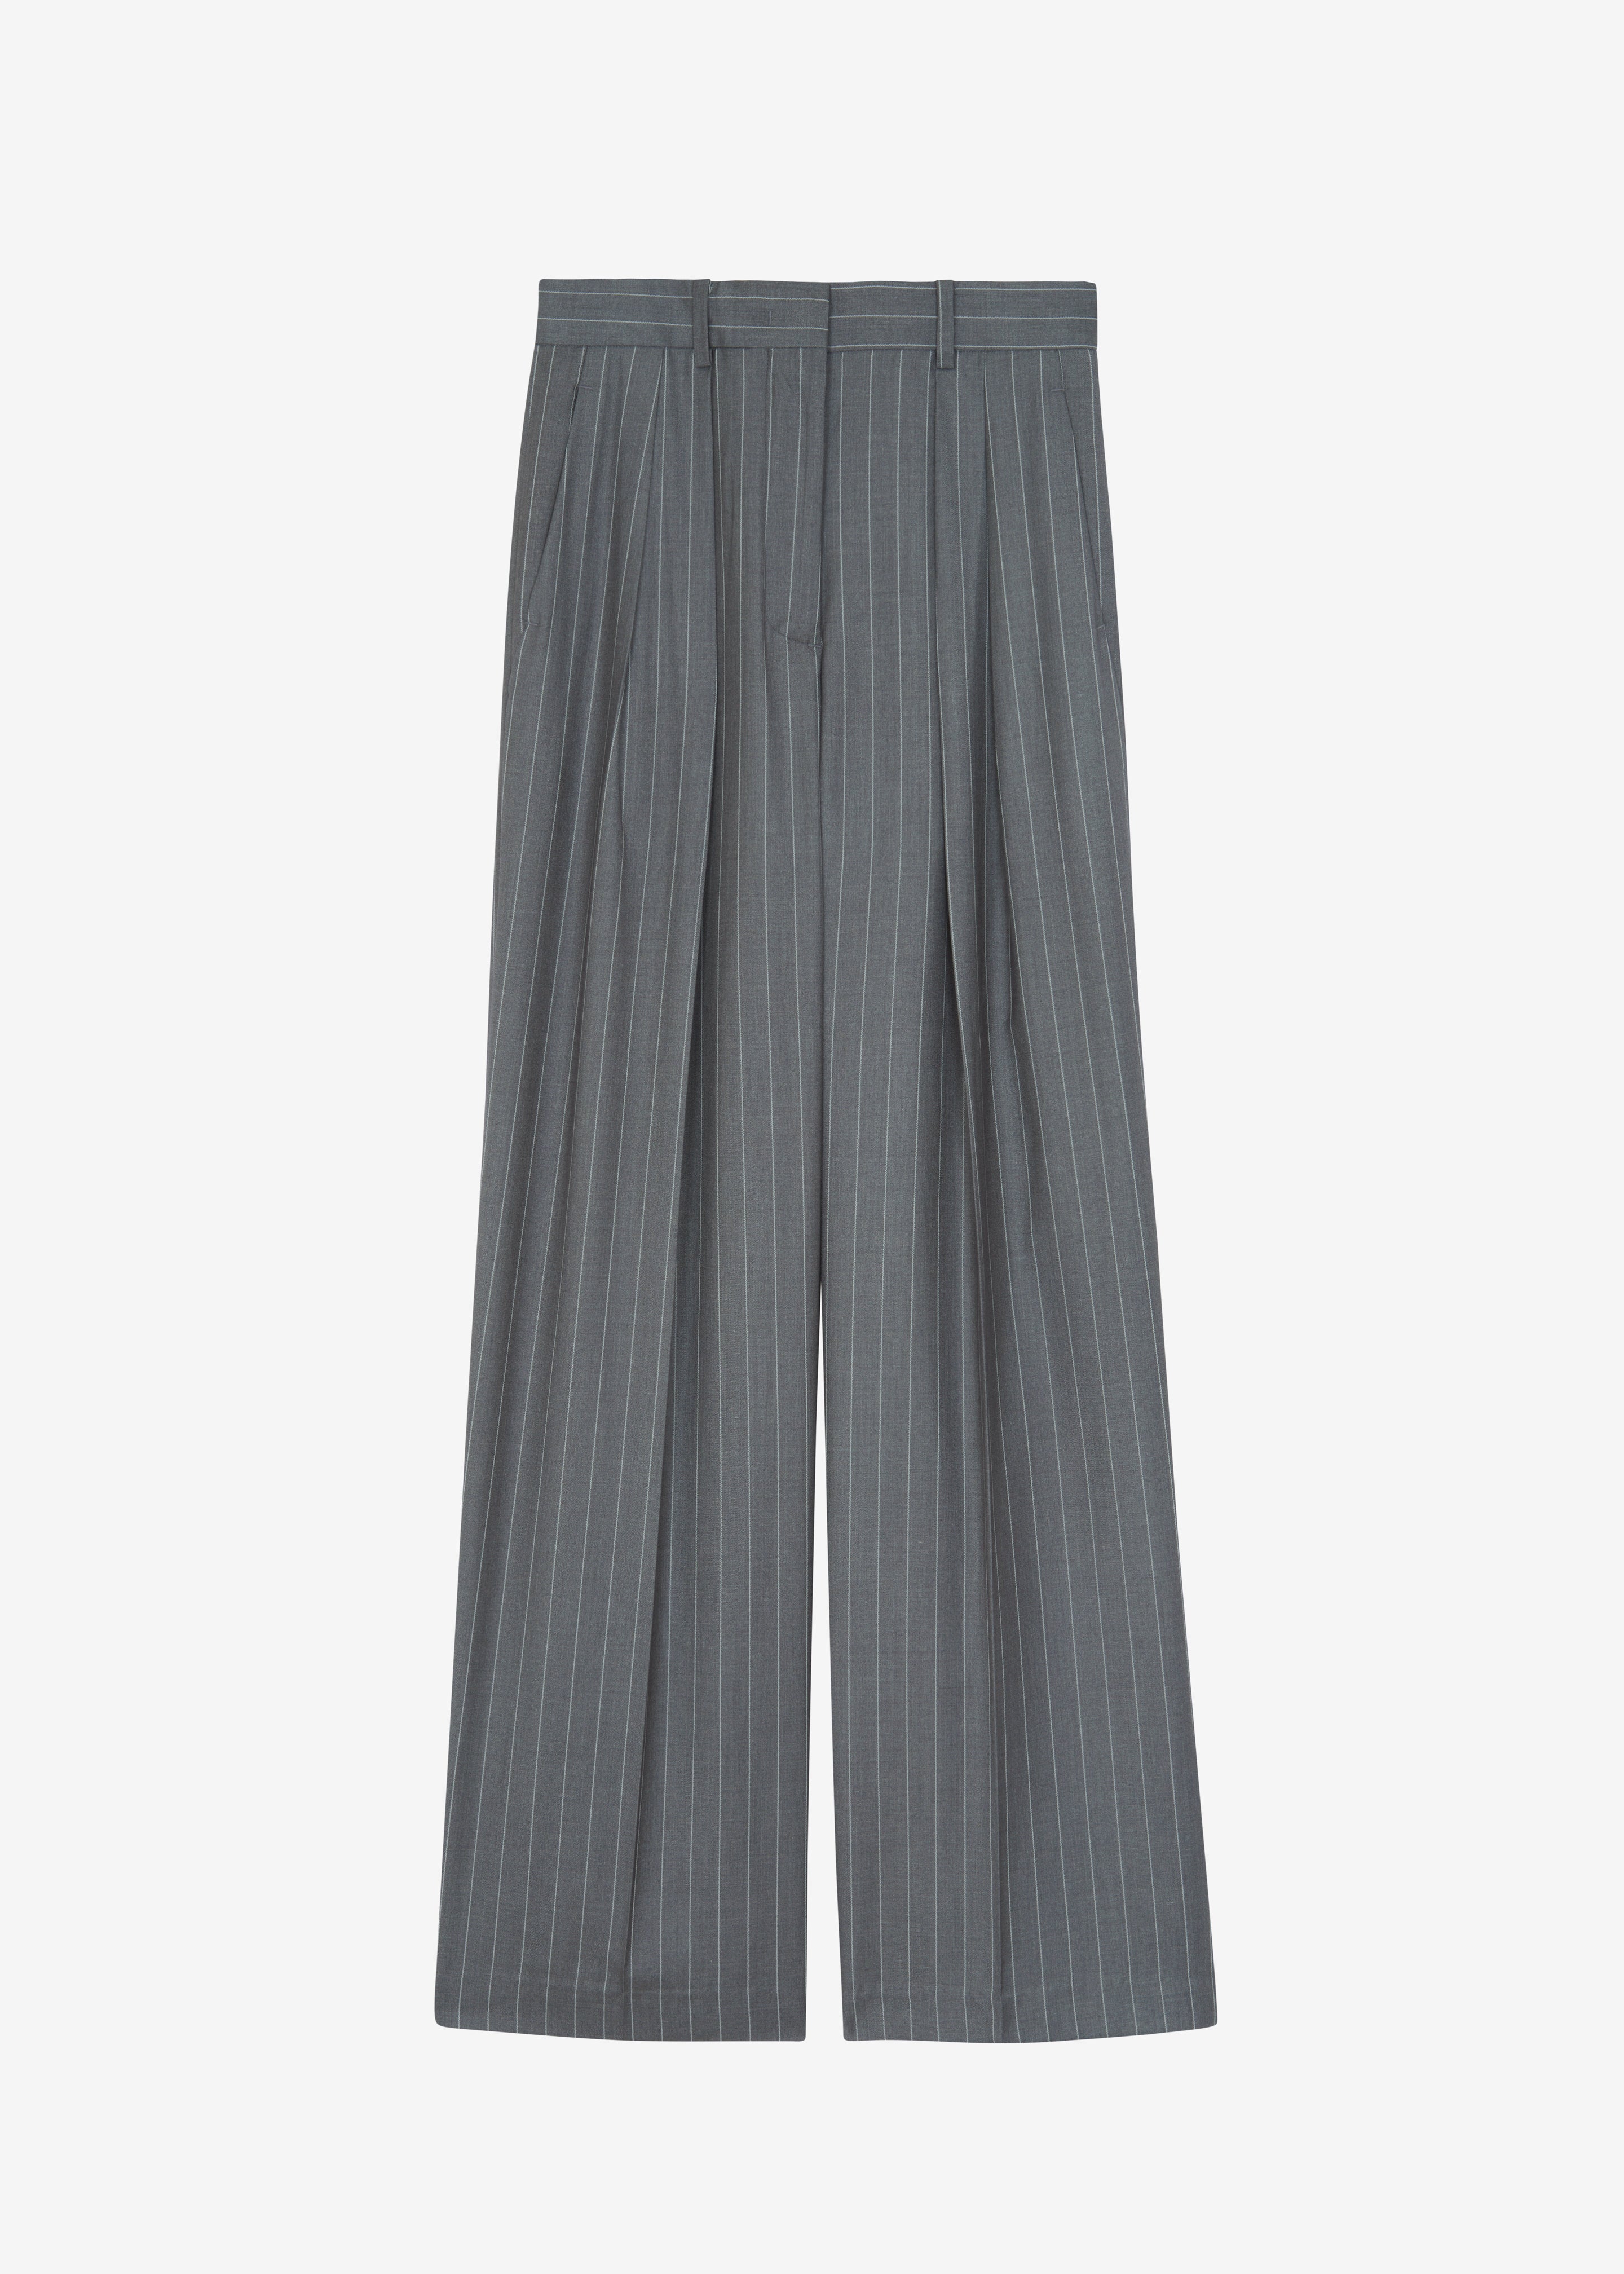 Holland Pleated Trousers - Charcoal/White Pinstripe - 8